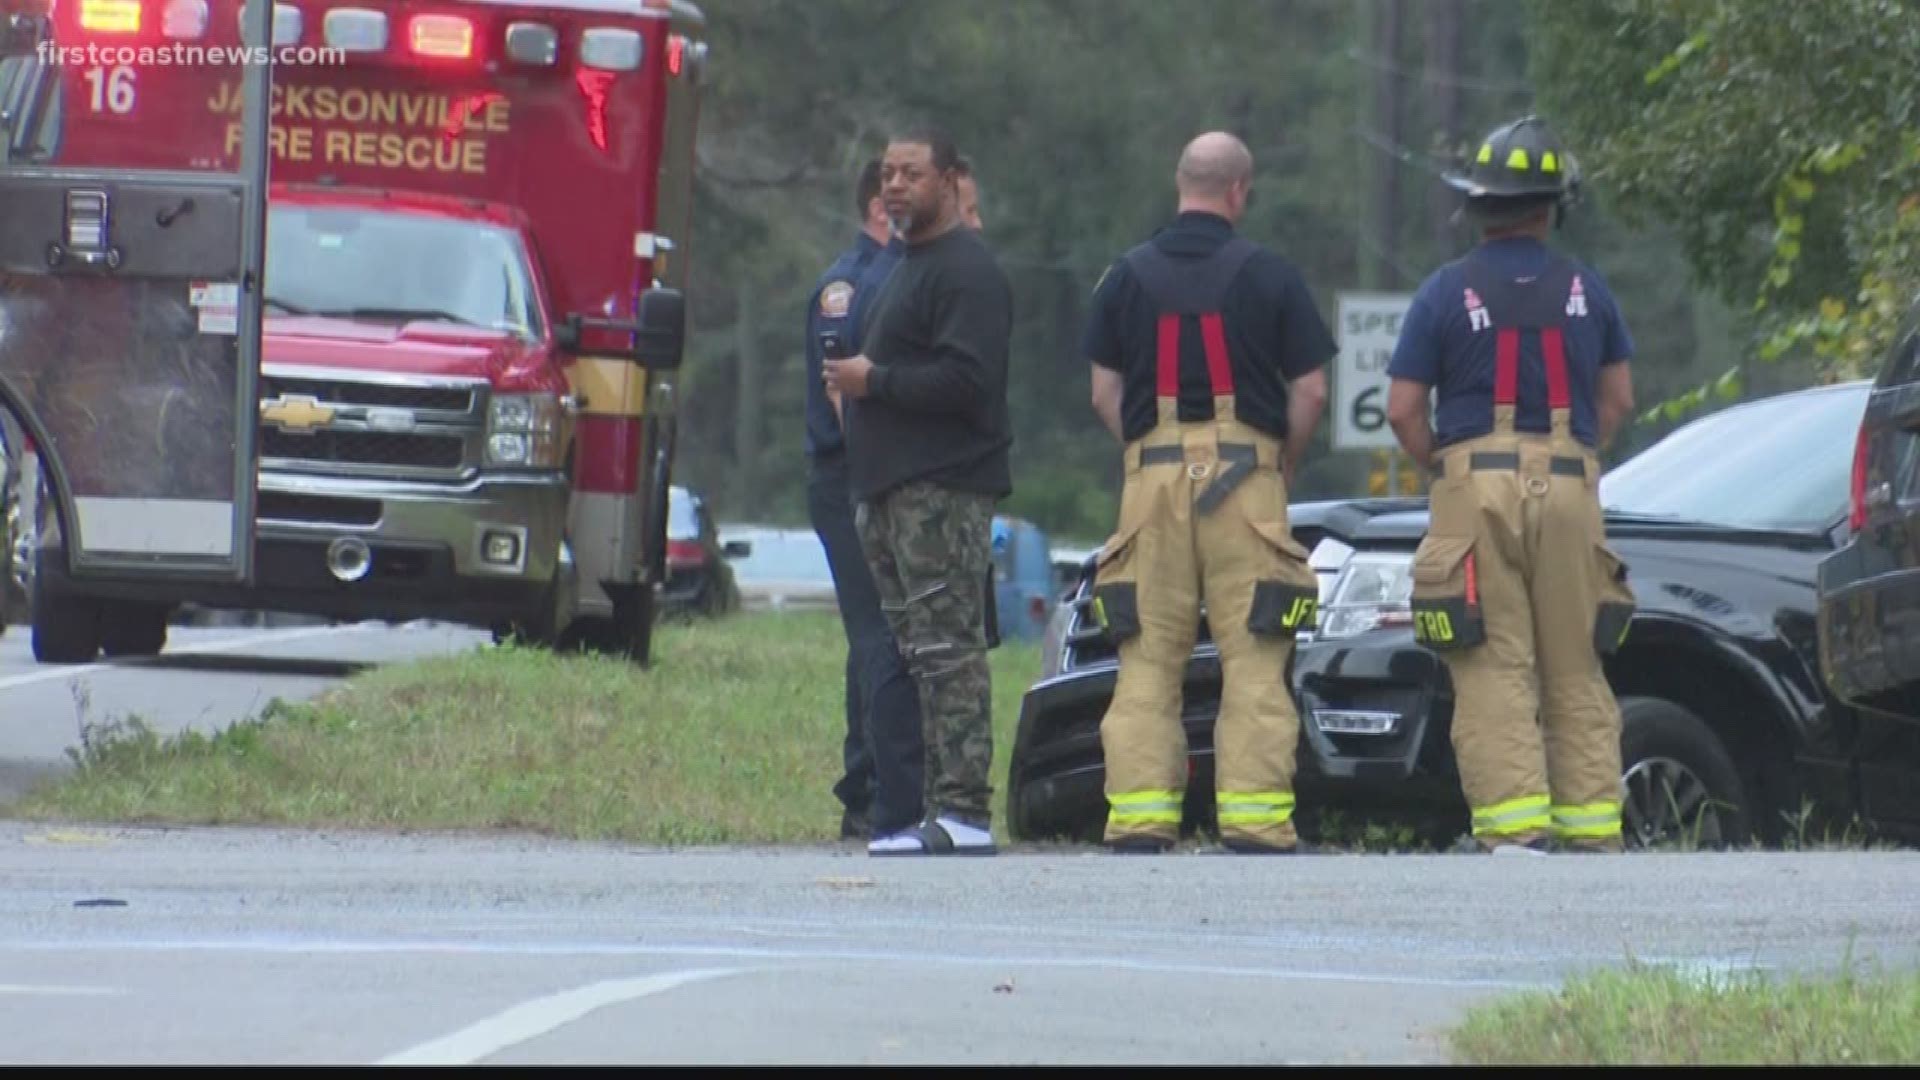 One person was extricated from a vehicle after a multi-vehicle accident in Northwest Jacksonville Thursday afternoon.